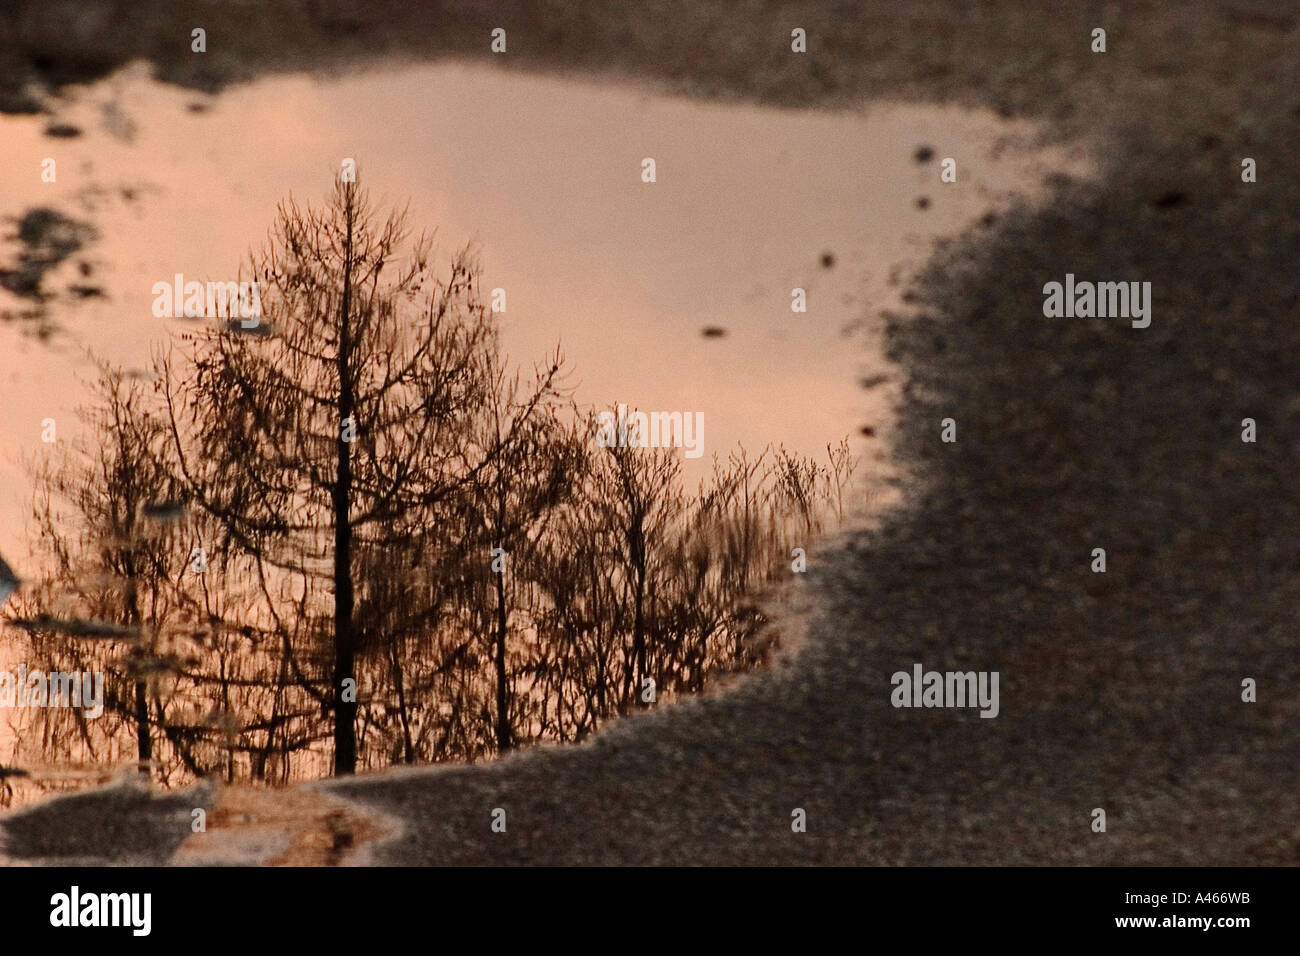 tree reflected in one water puddle in film grain Stock Photo